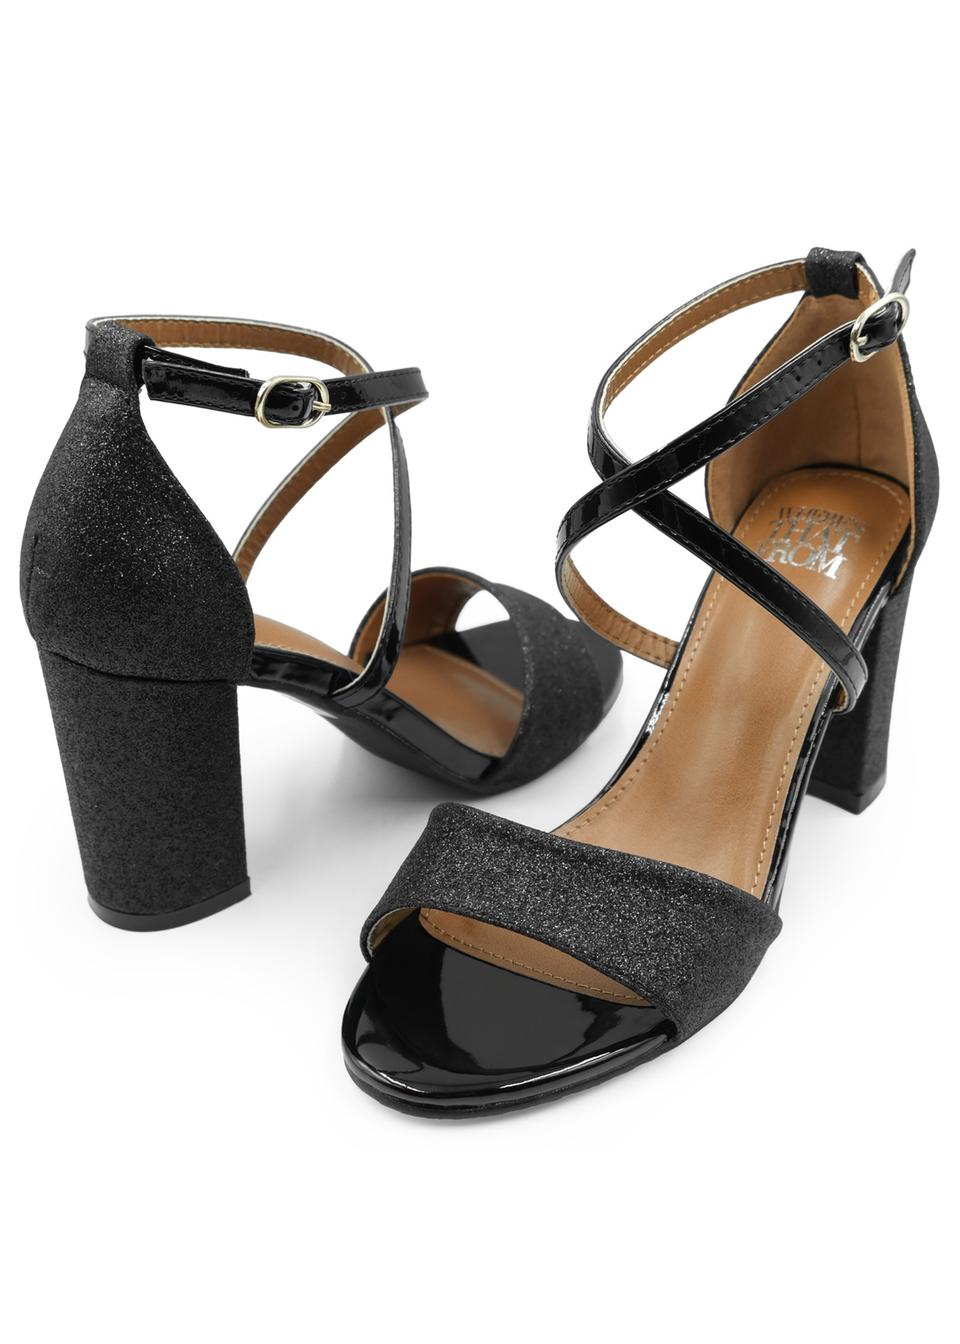 Where's That From Black Ruth Mid High Block Heel Sandals